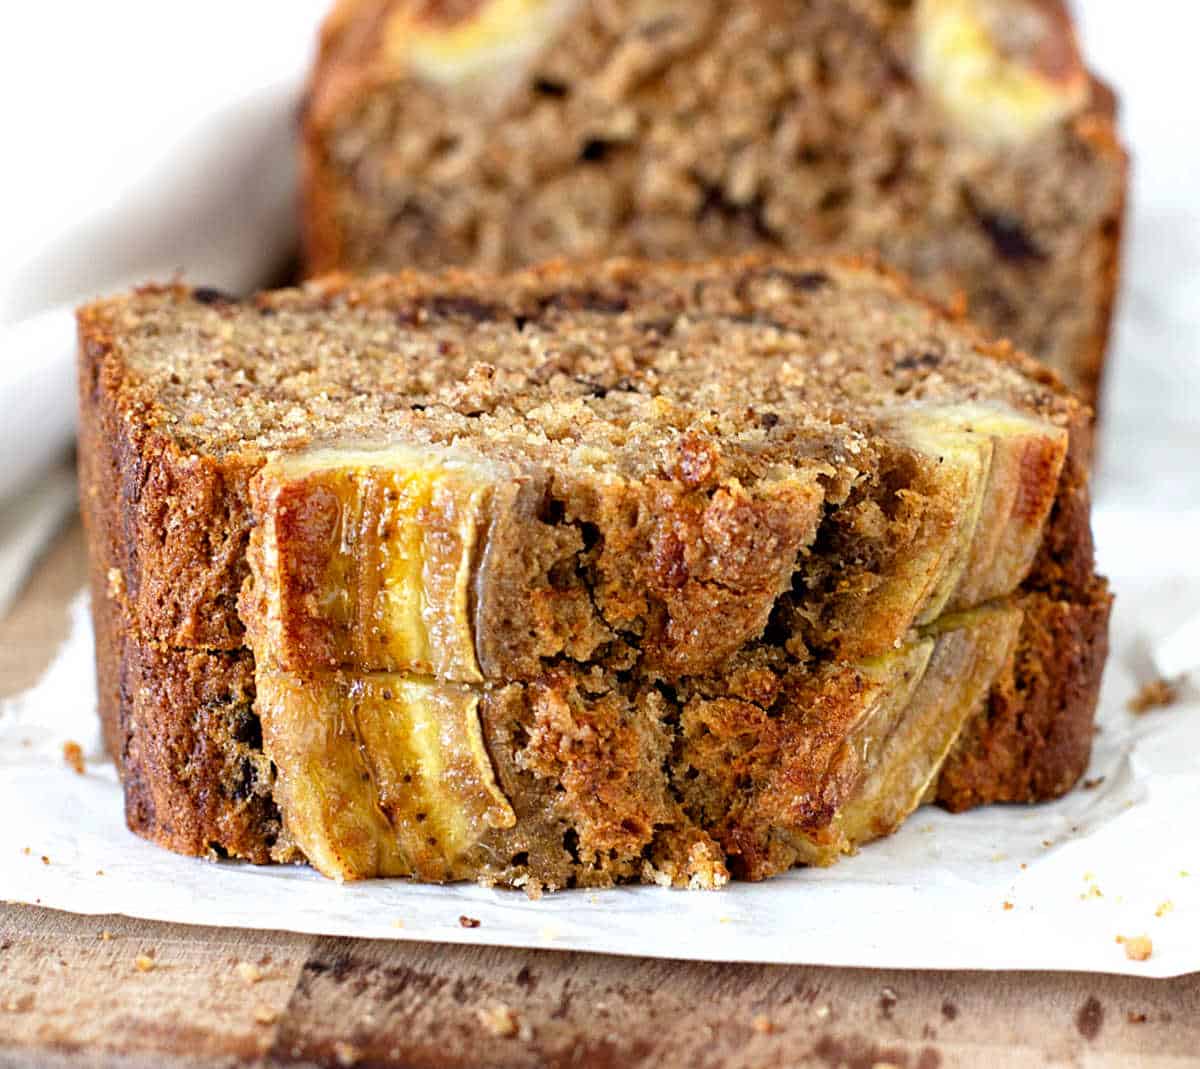 Two stacked slices of banana bread on white paper.